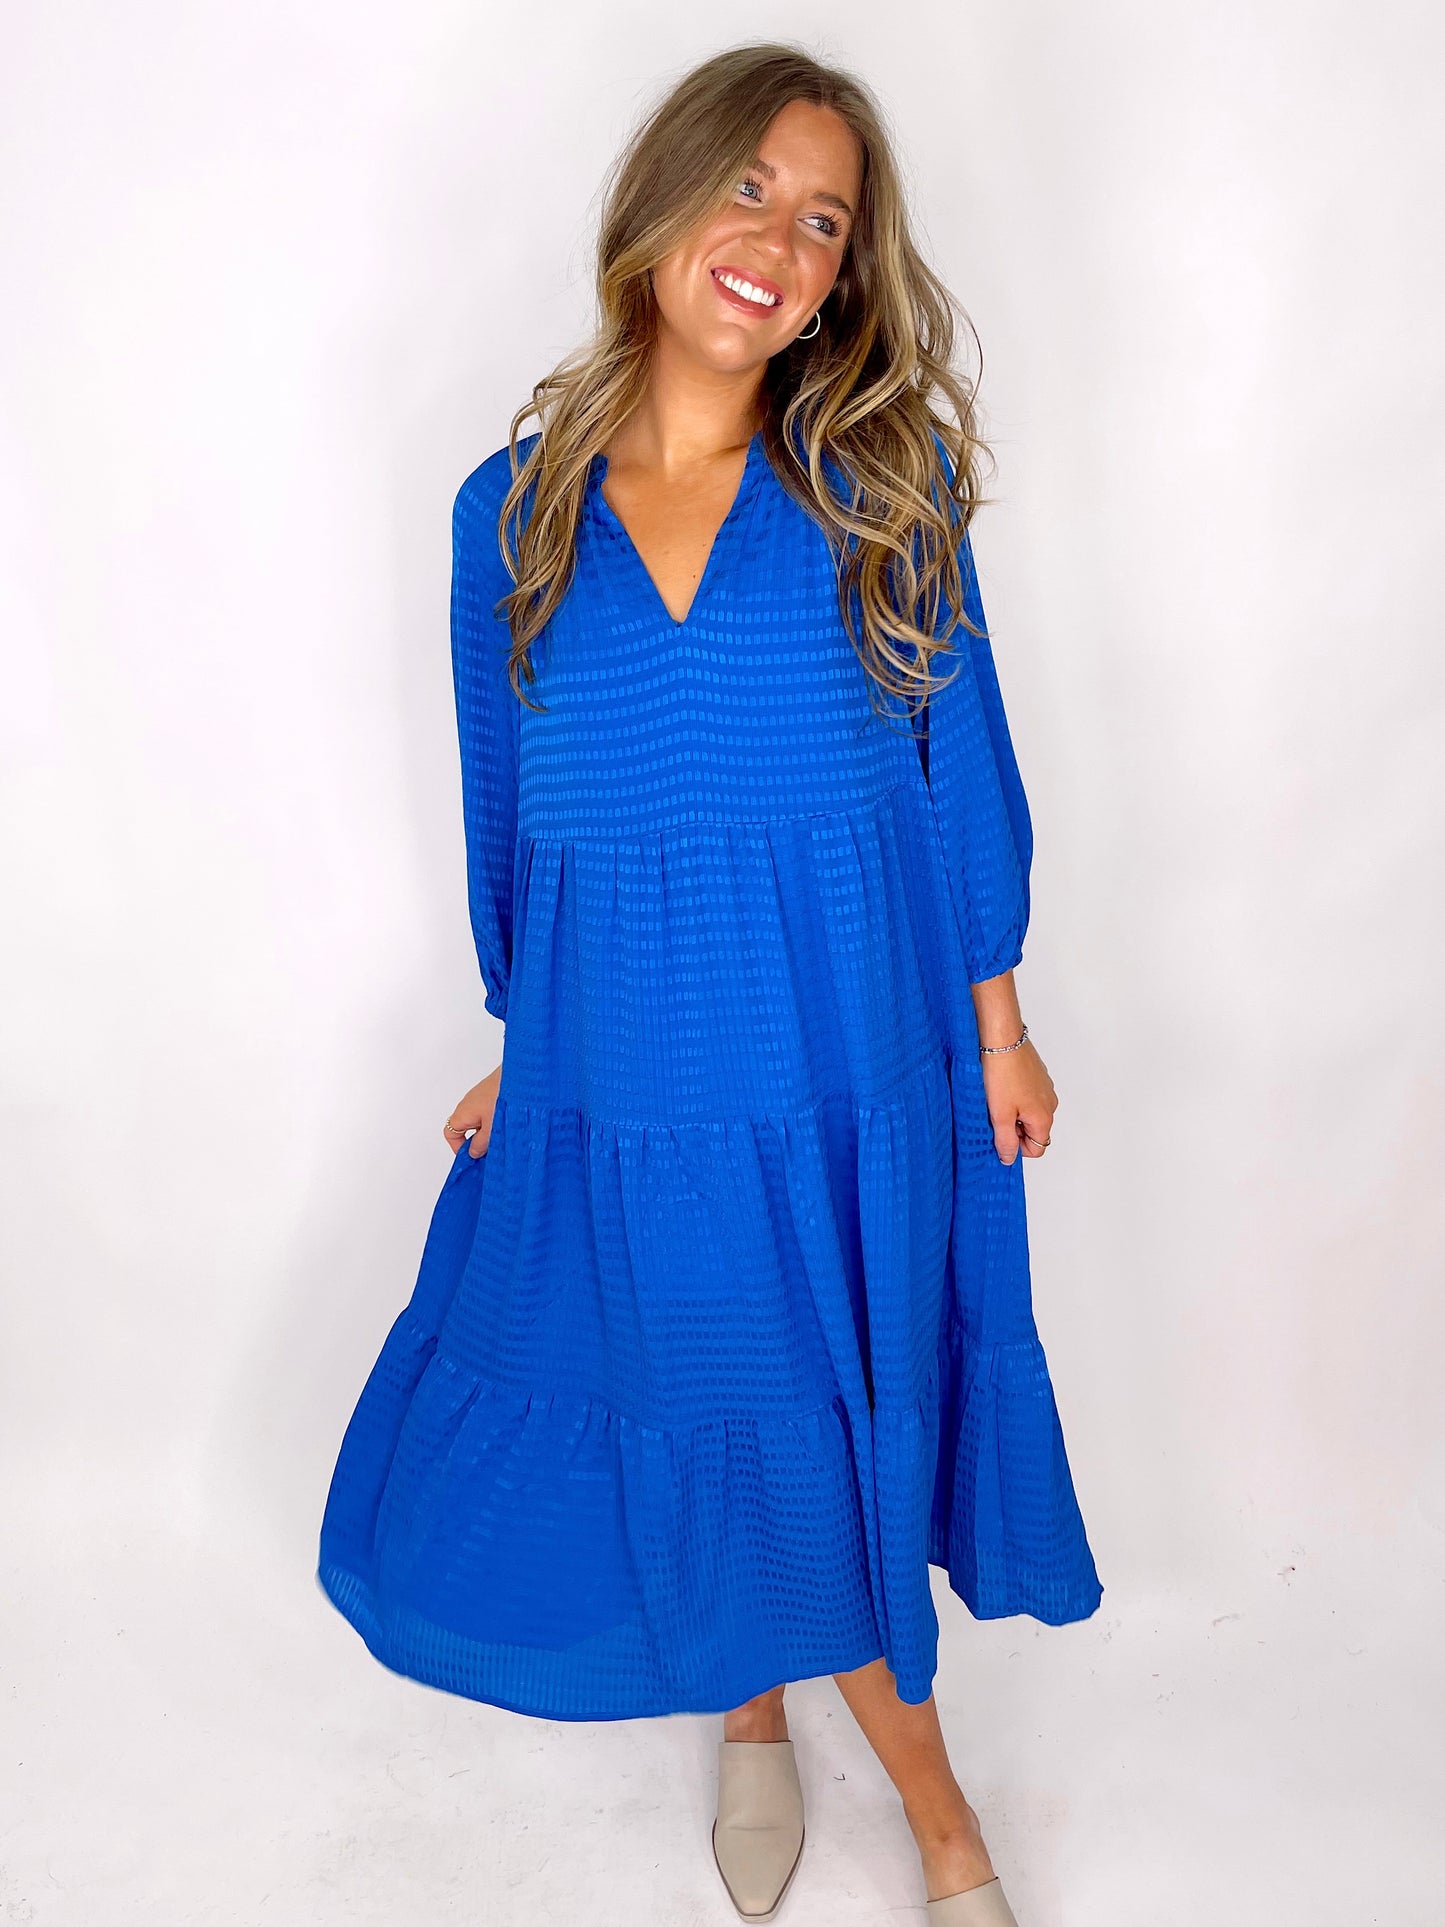 The Shannon Midi Dress-Midi Dress-Entro-The Village Shoppe, Women’s Fashion Boutique, Shop Online and In Store - Located in Muscle Shoals, AL.